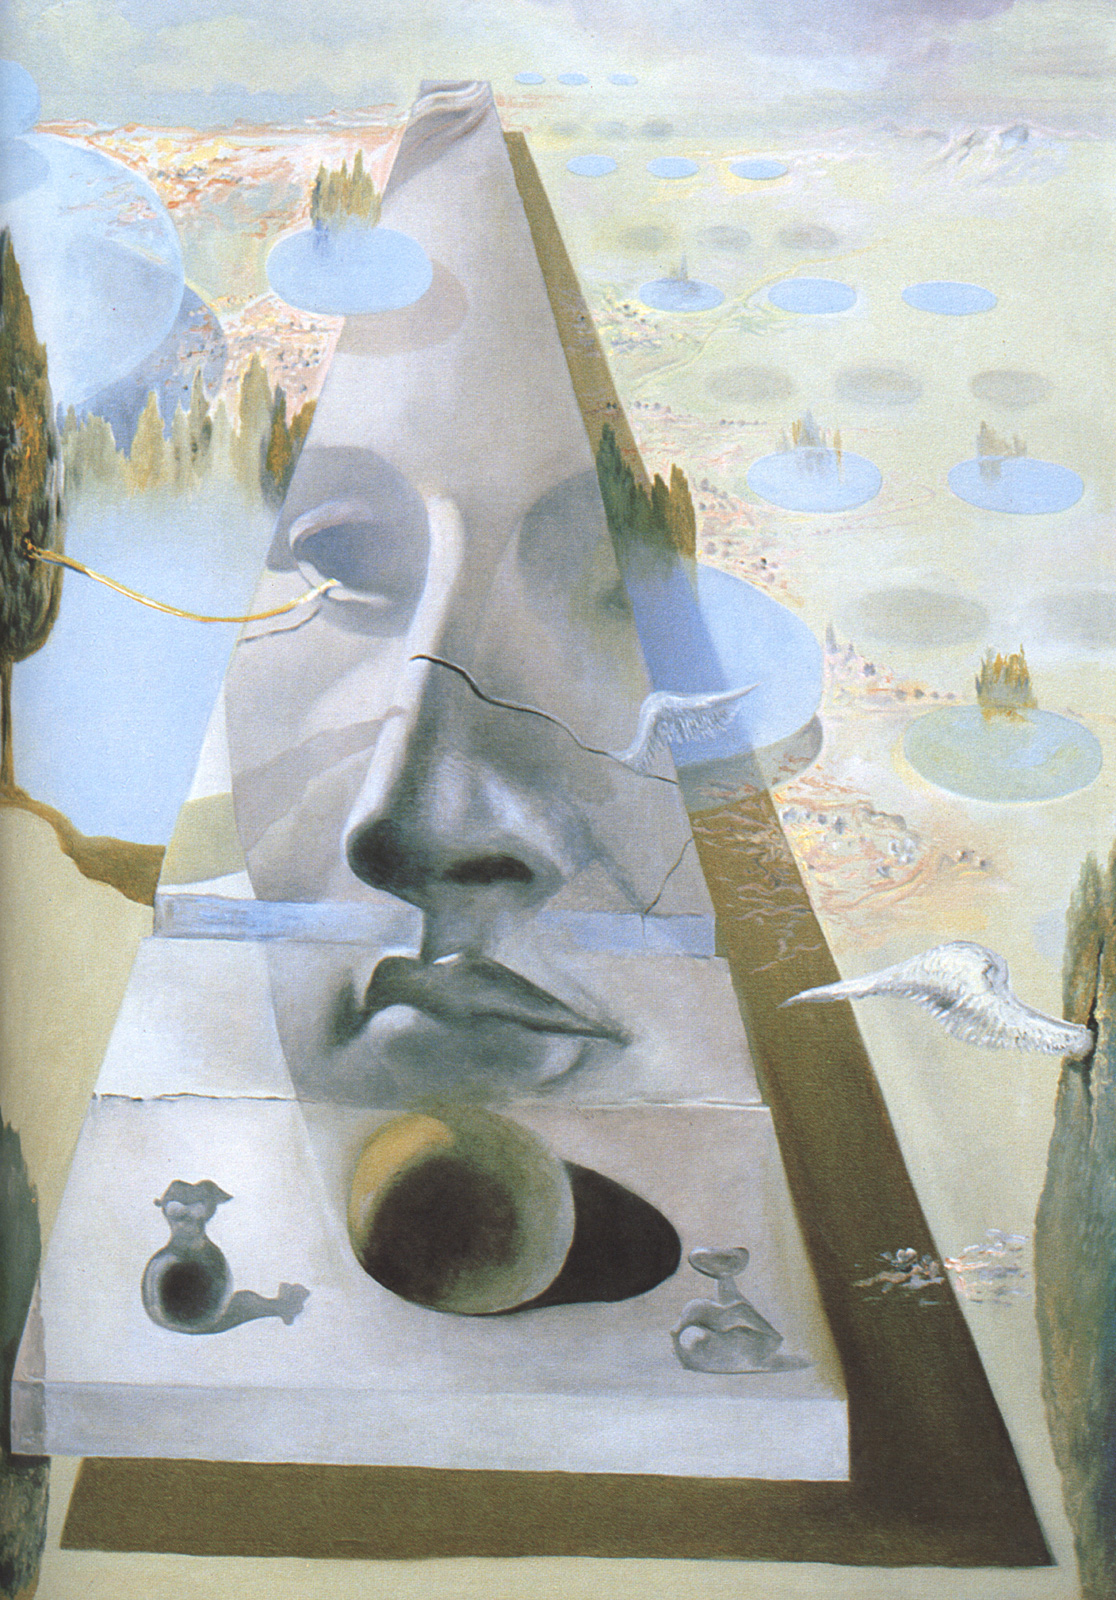 Apparition of the Visage of Aphrodite of Cnidos in a Landscape (1981).